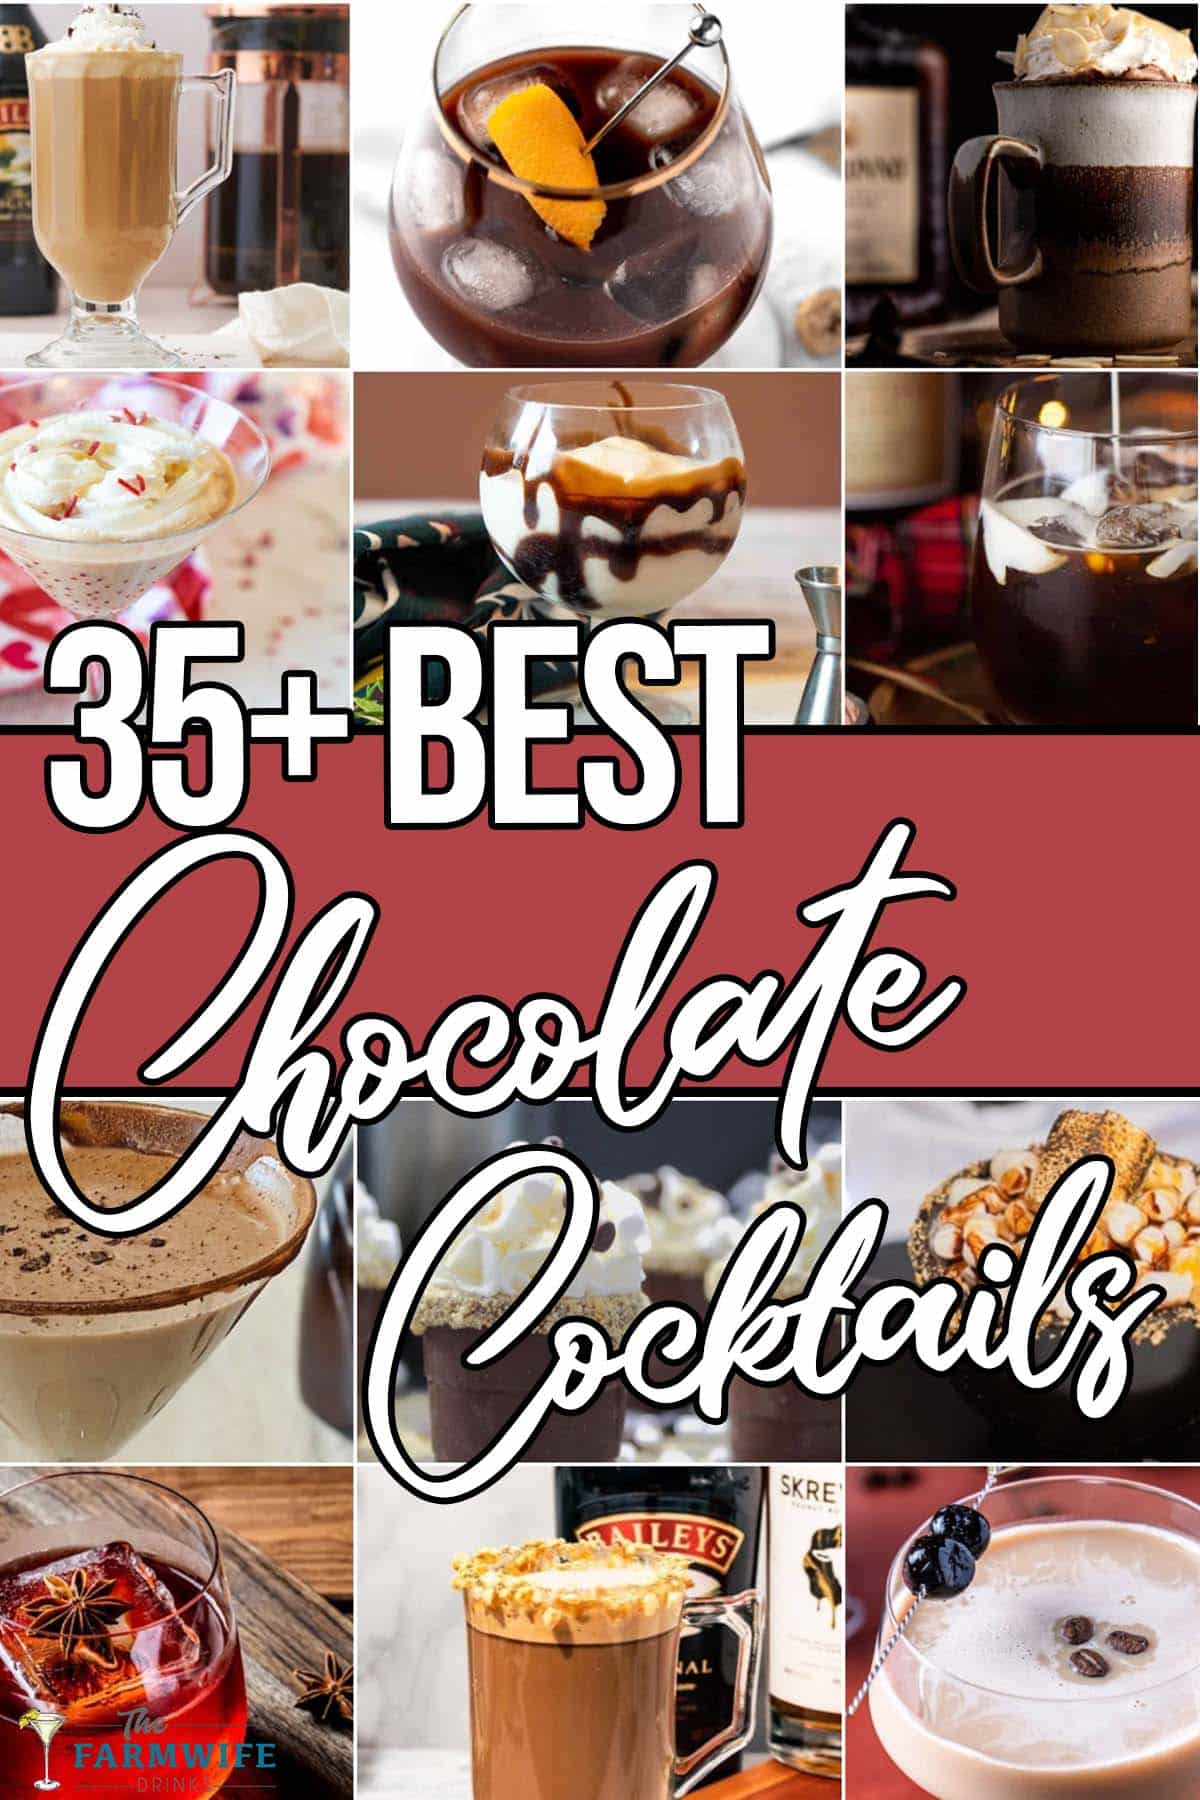 photo collage of chocolate beverage recipes with text which reads 35+ best chocolate cocktails